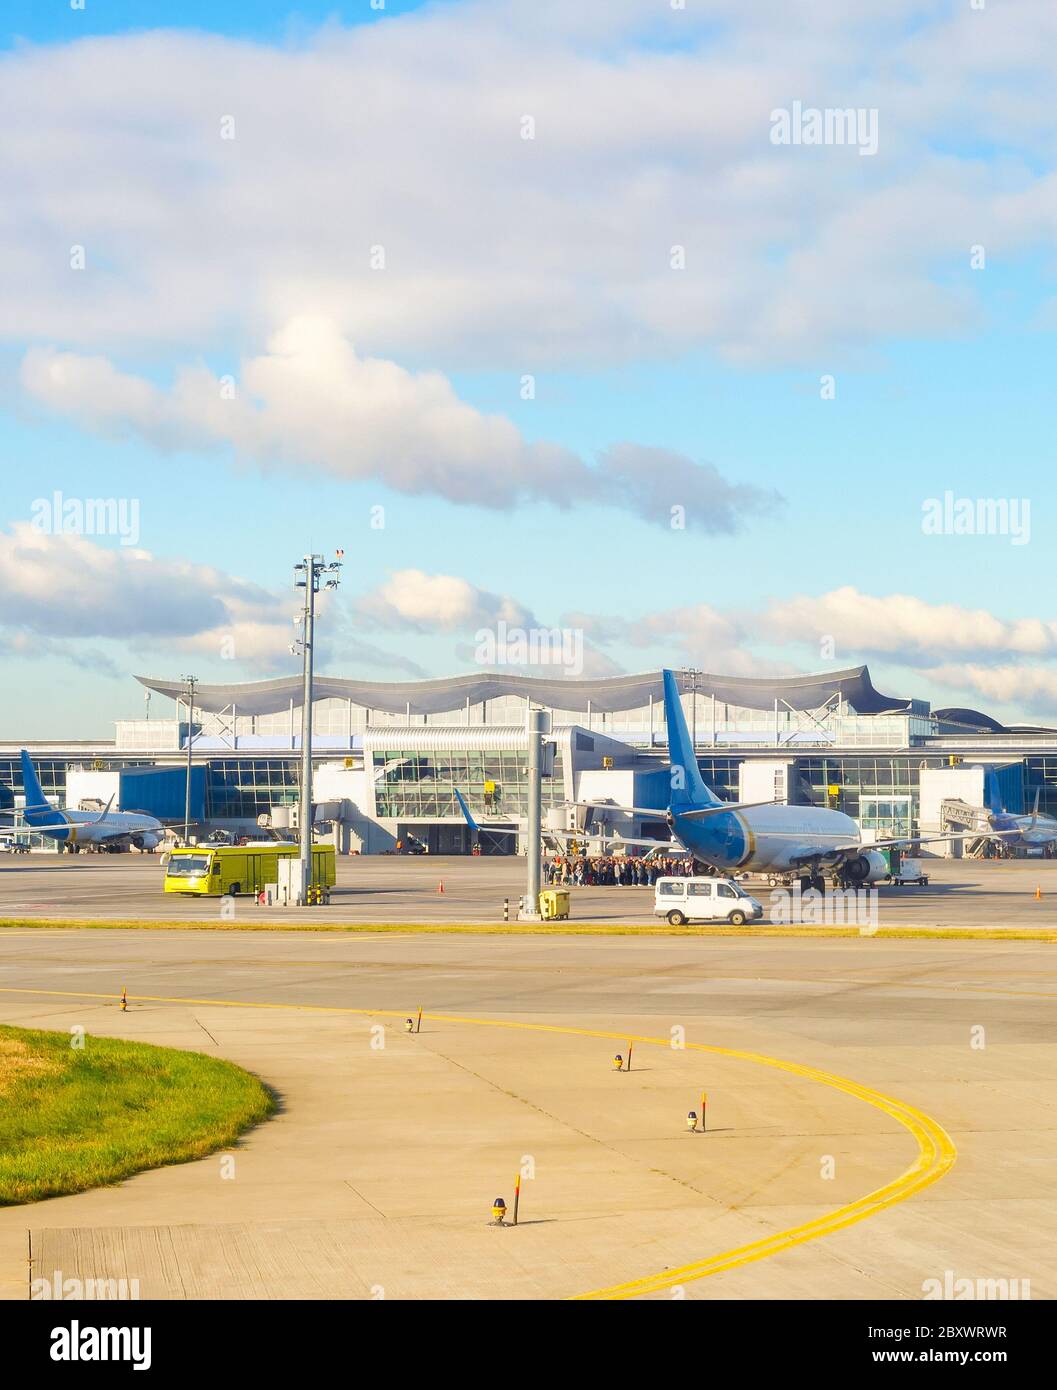 Boryspil airport scene, airplanes, bus and passengers queue at airfield. Kyiv, Ukraine Stock Photo